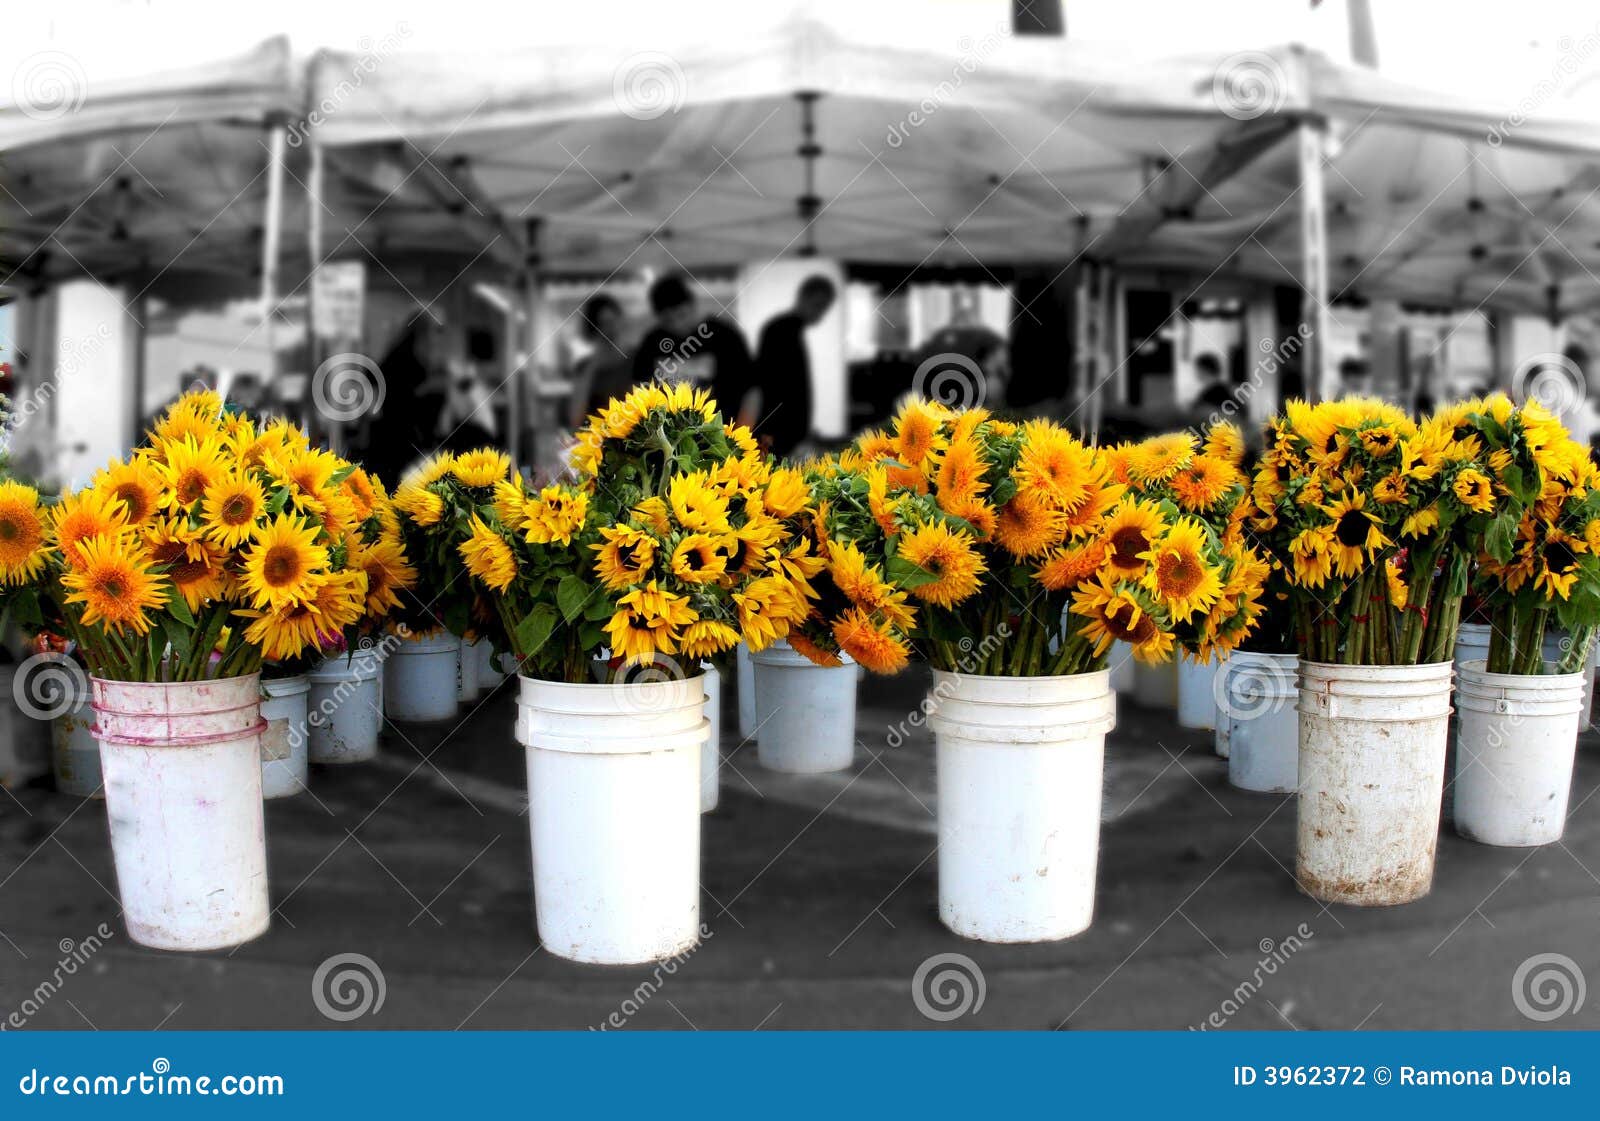 sunflowers at the market